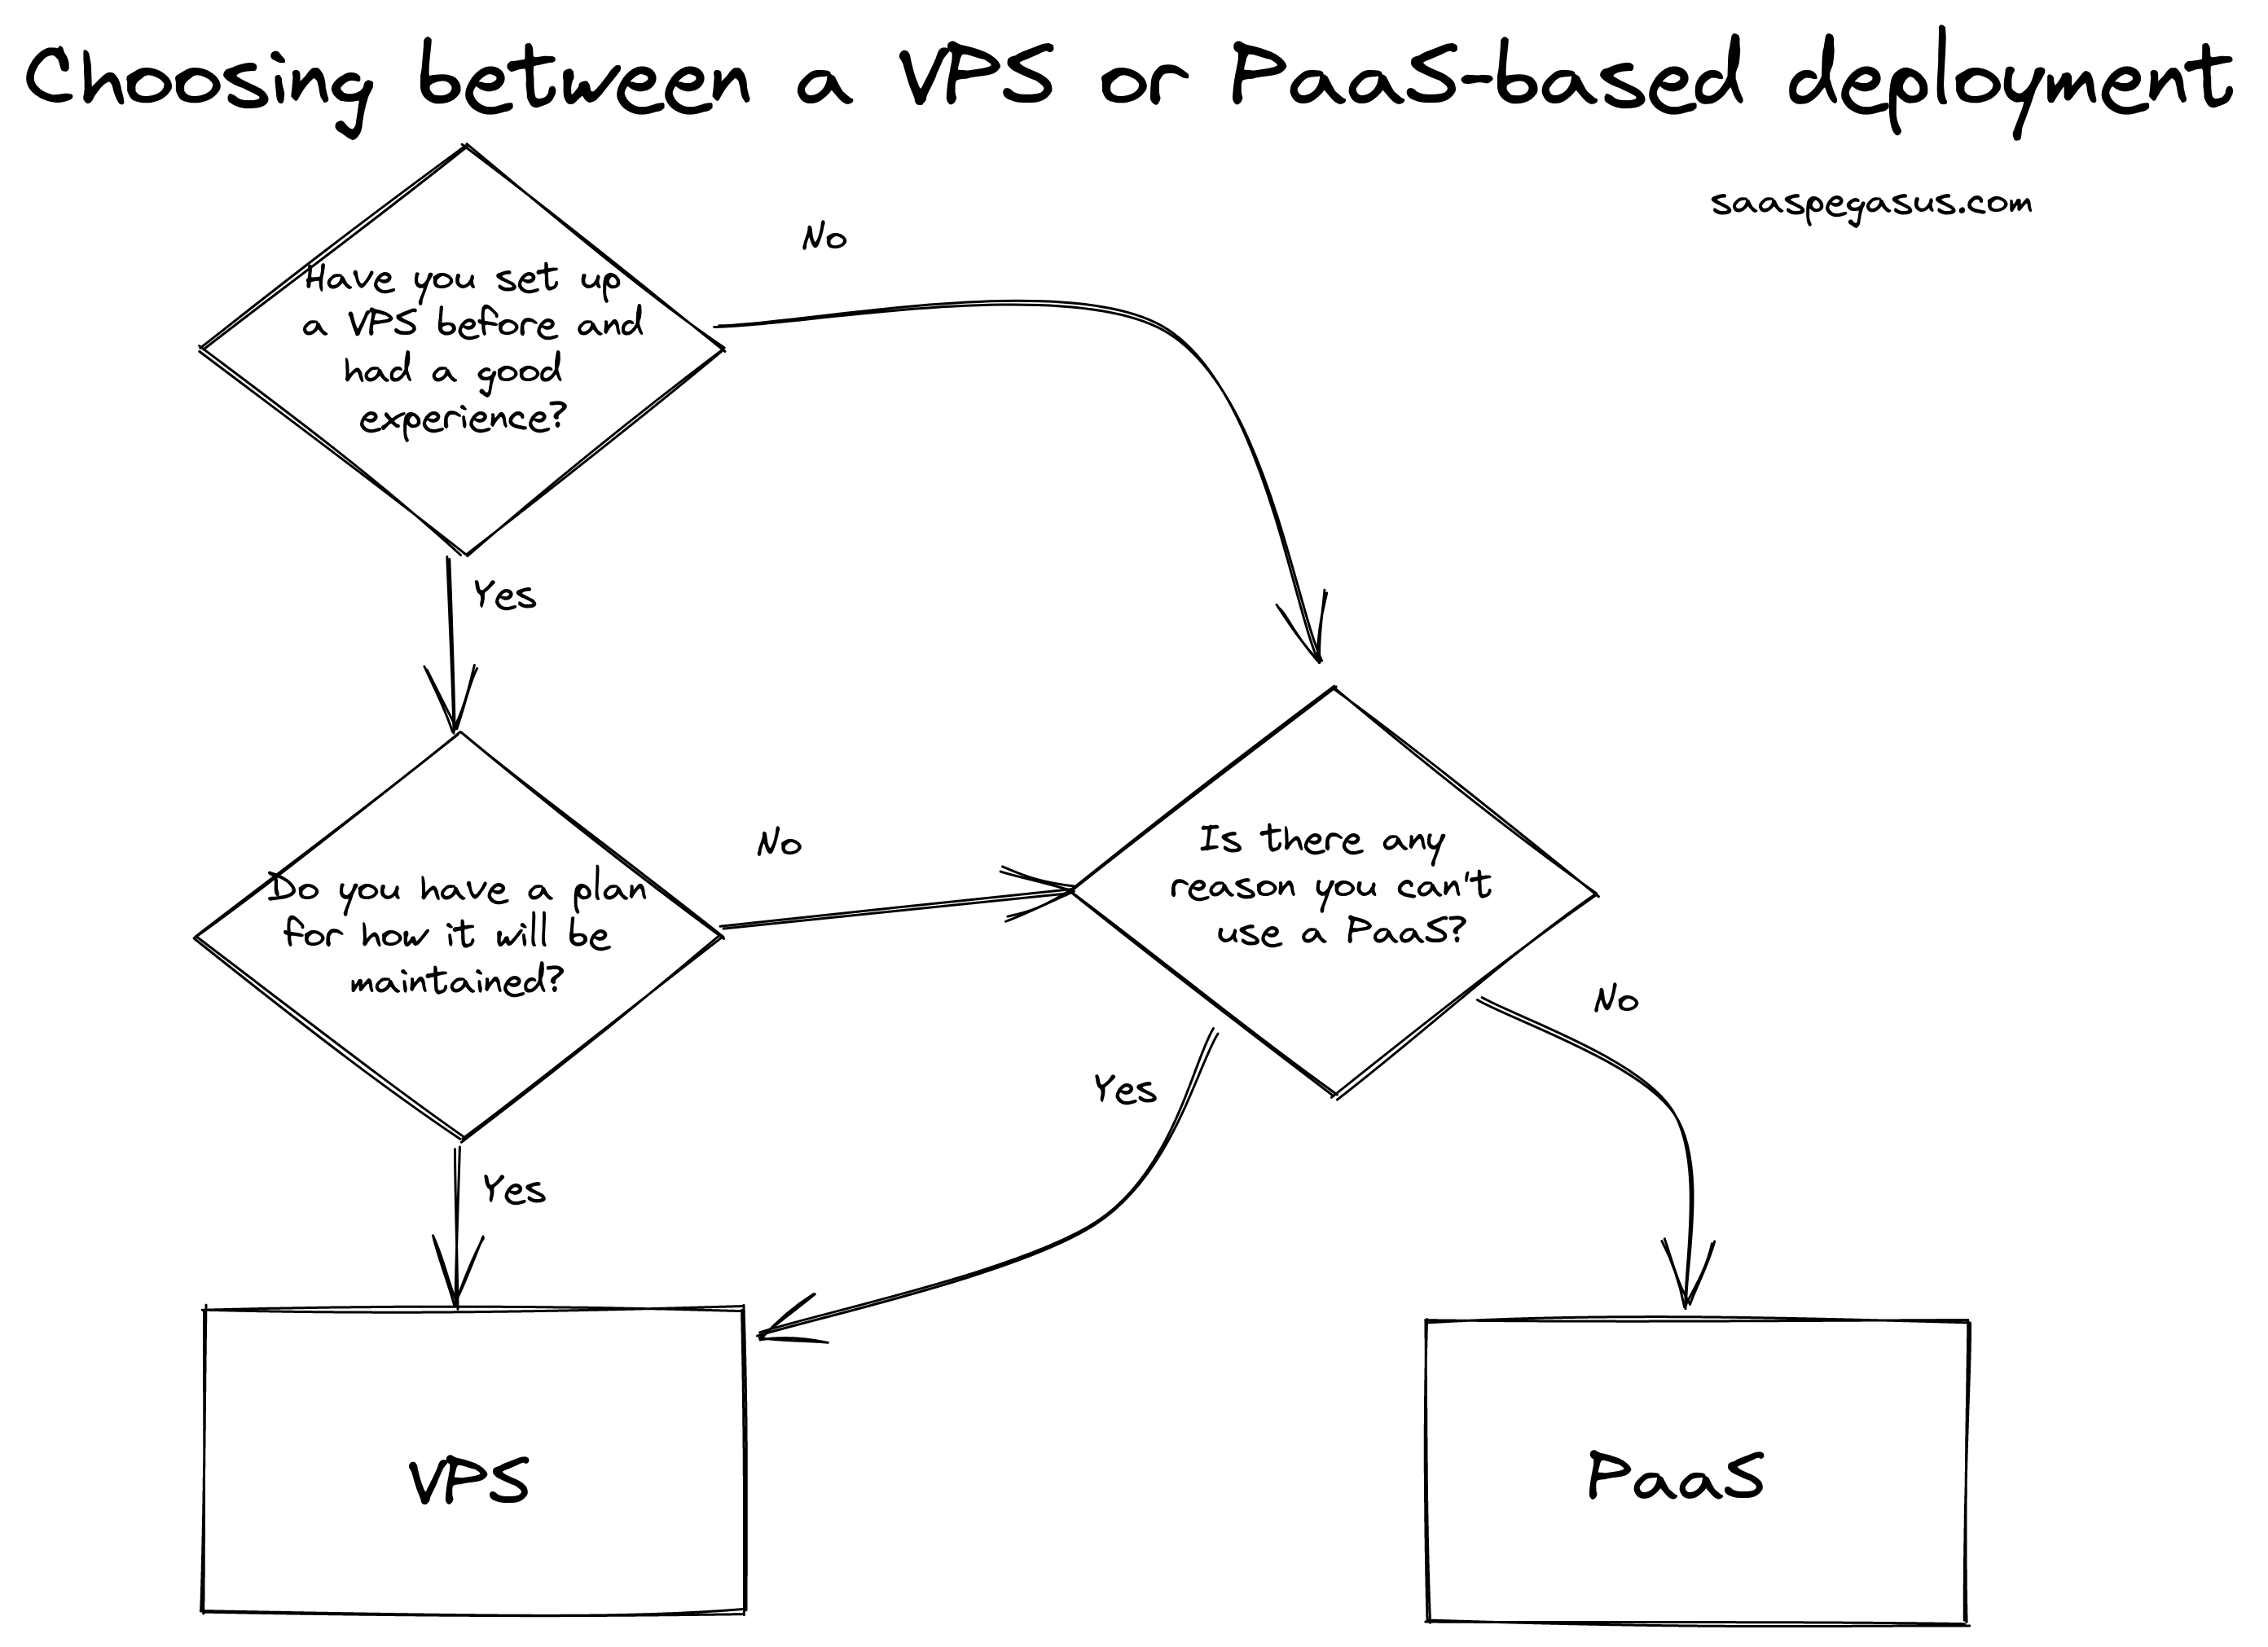 Choosing between a VPS and a PaaS